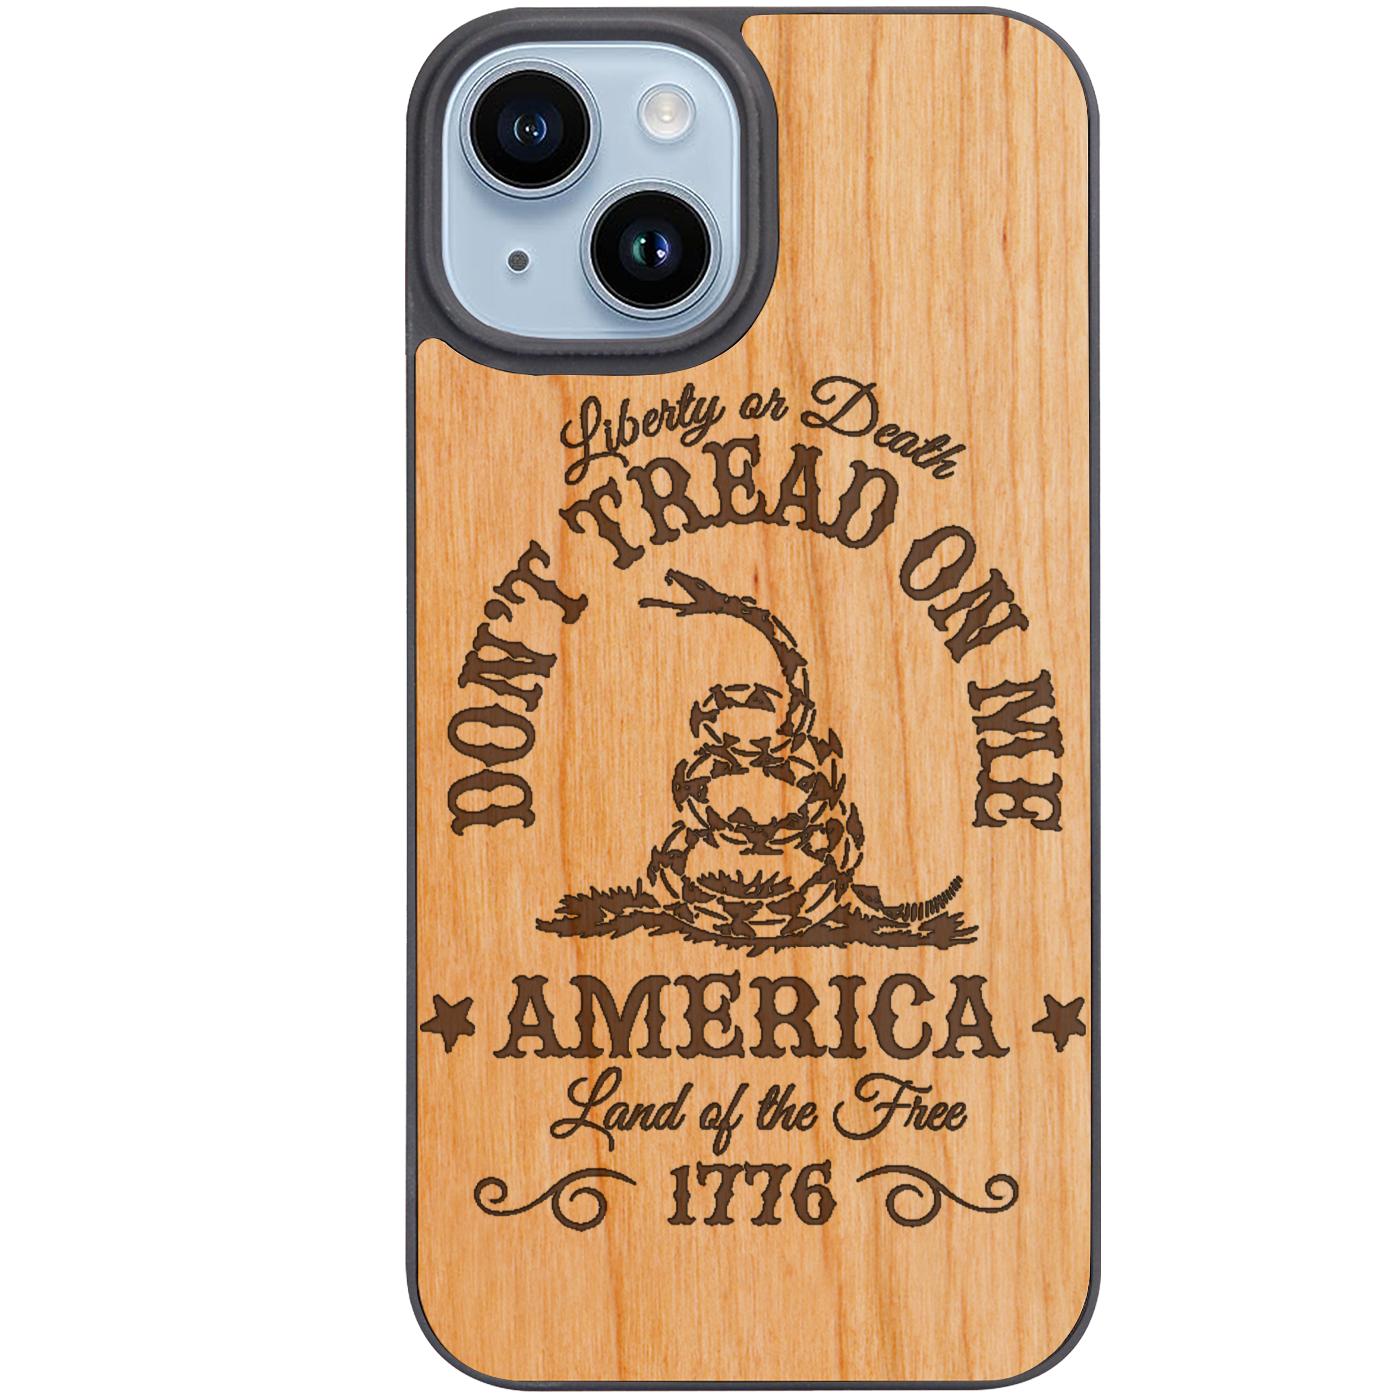 Don't Tread on me - Engraved Phone Case